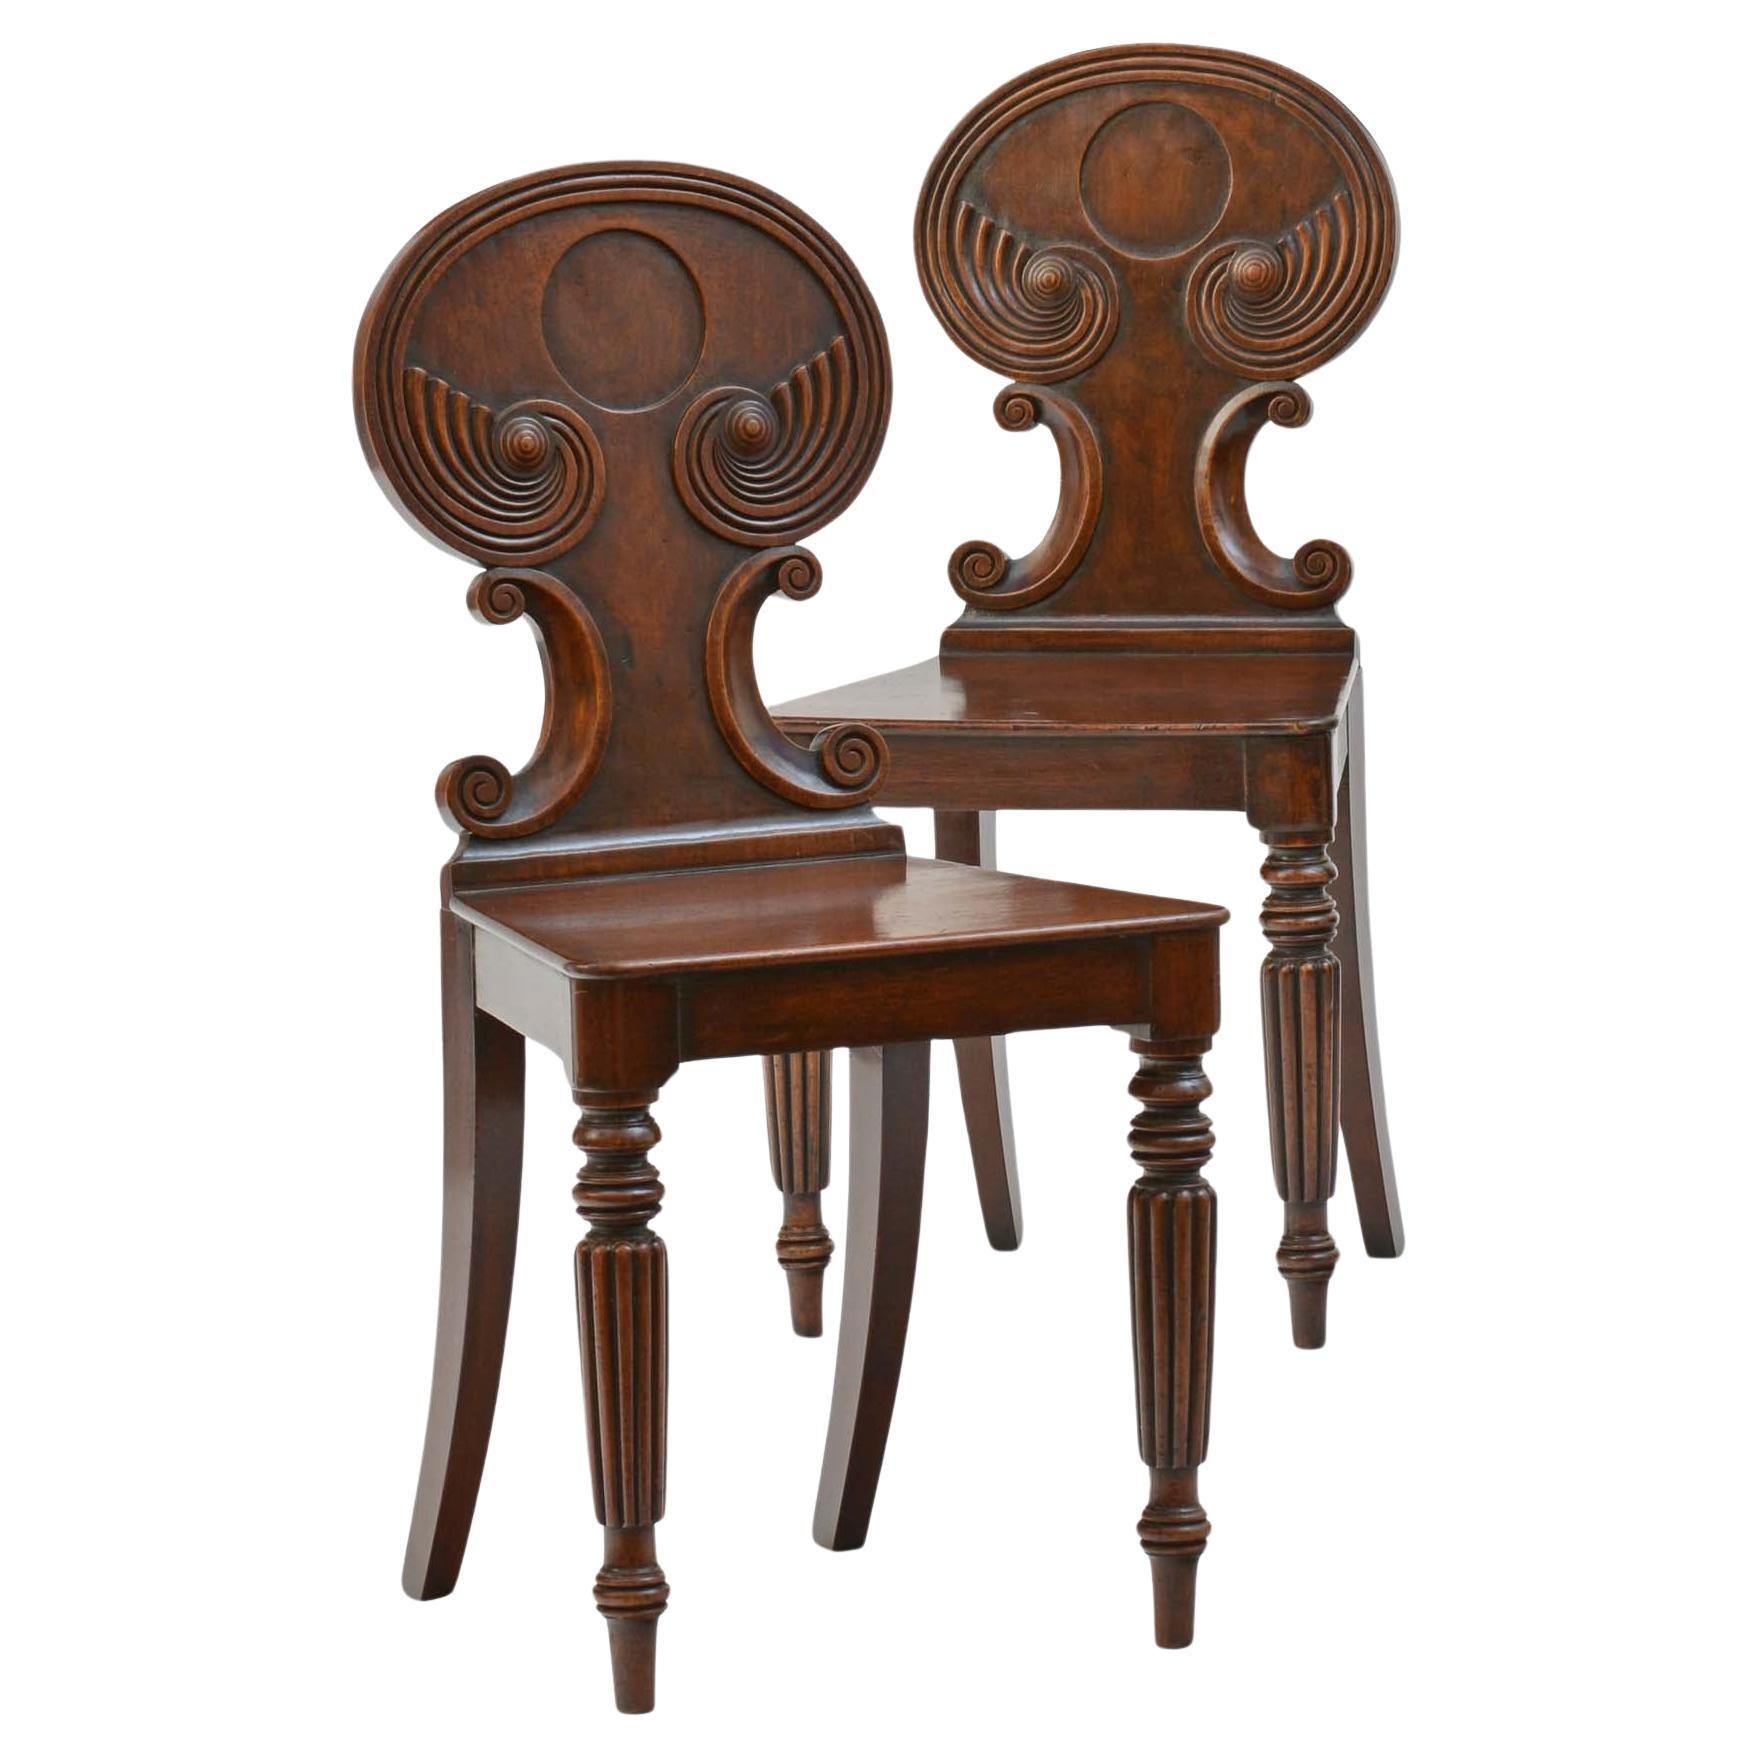 Pair of antique Regency mahogany hall chairs in the manner of Gillows